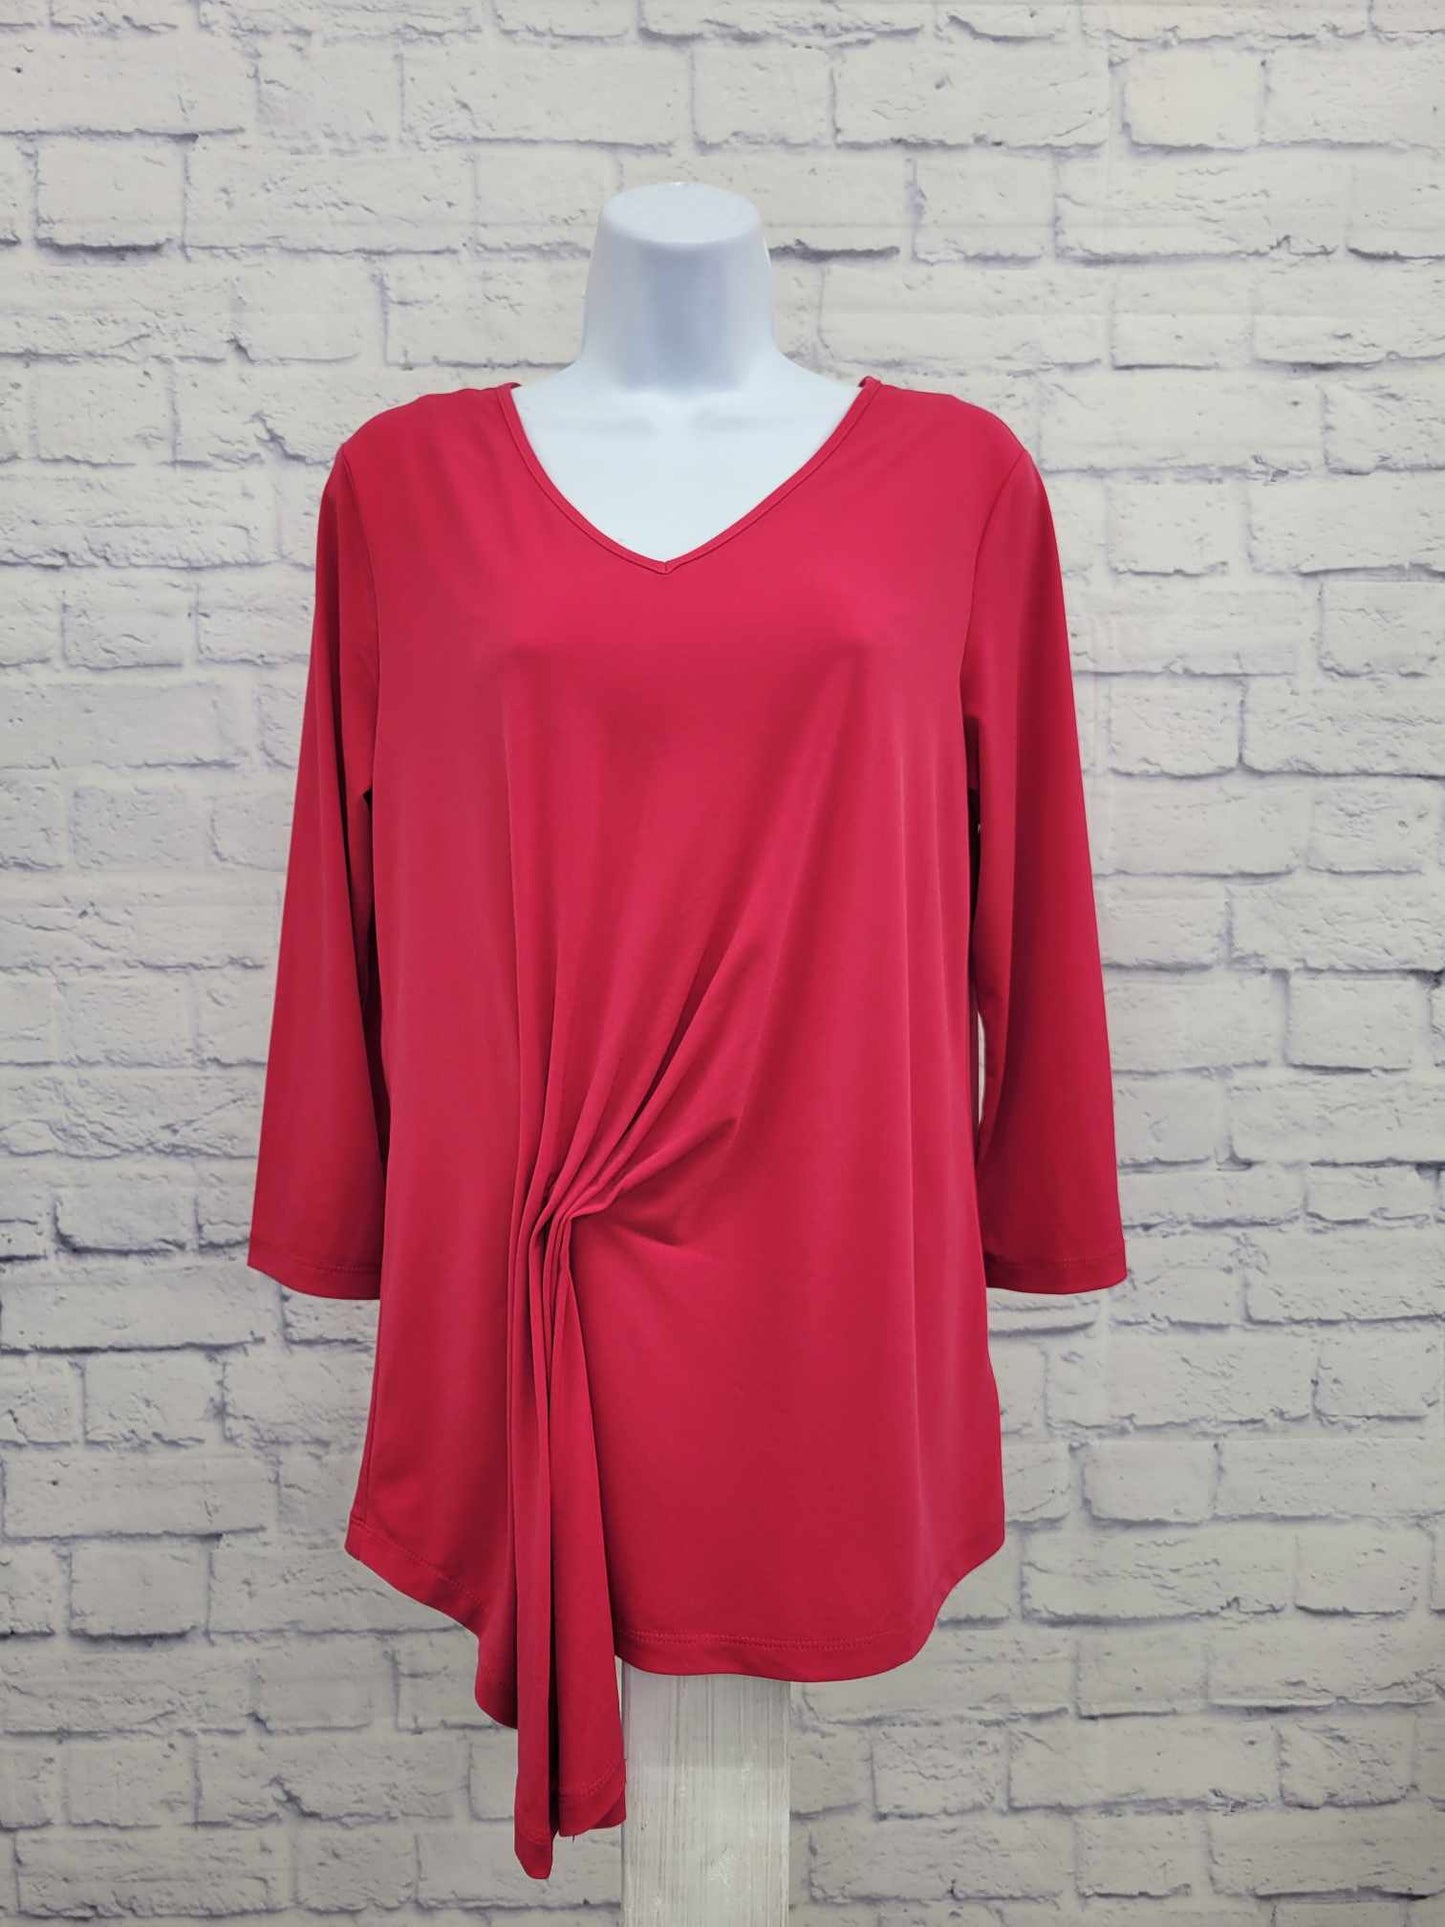 SMALL HIBISCUS PINK A373706 Susan Graver Liquid Knit VNeck Top with Side Drape Detail